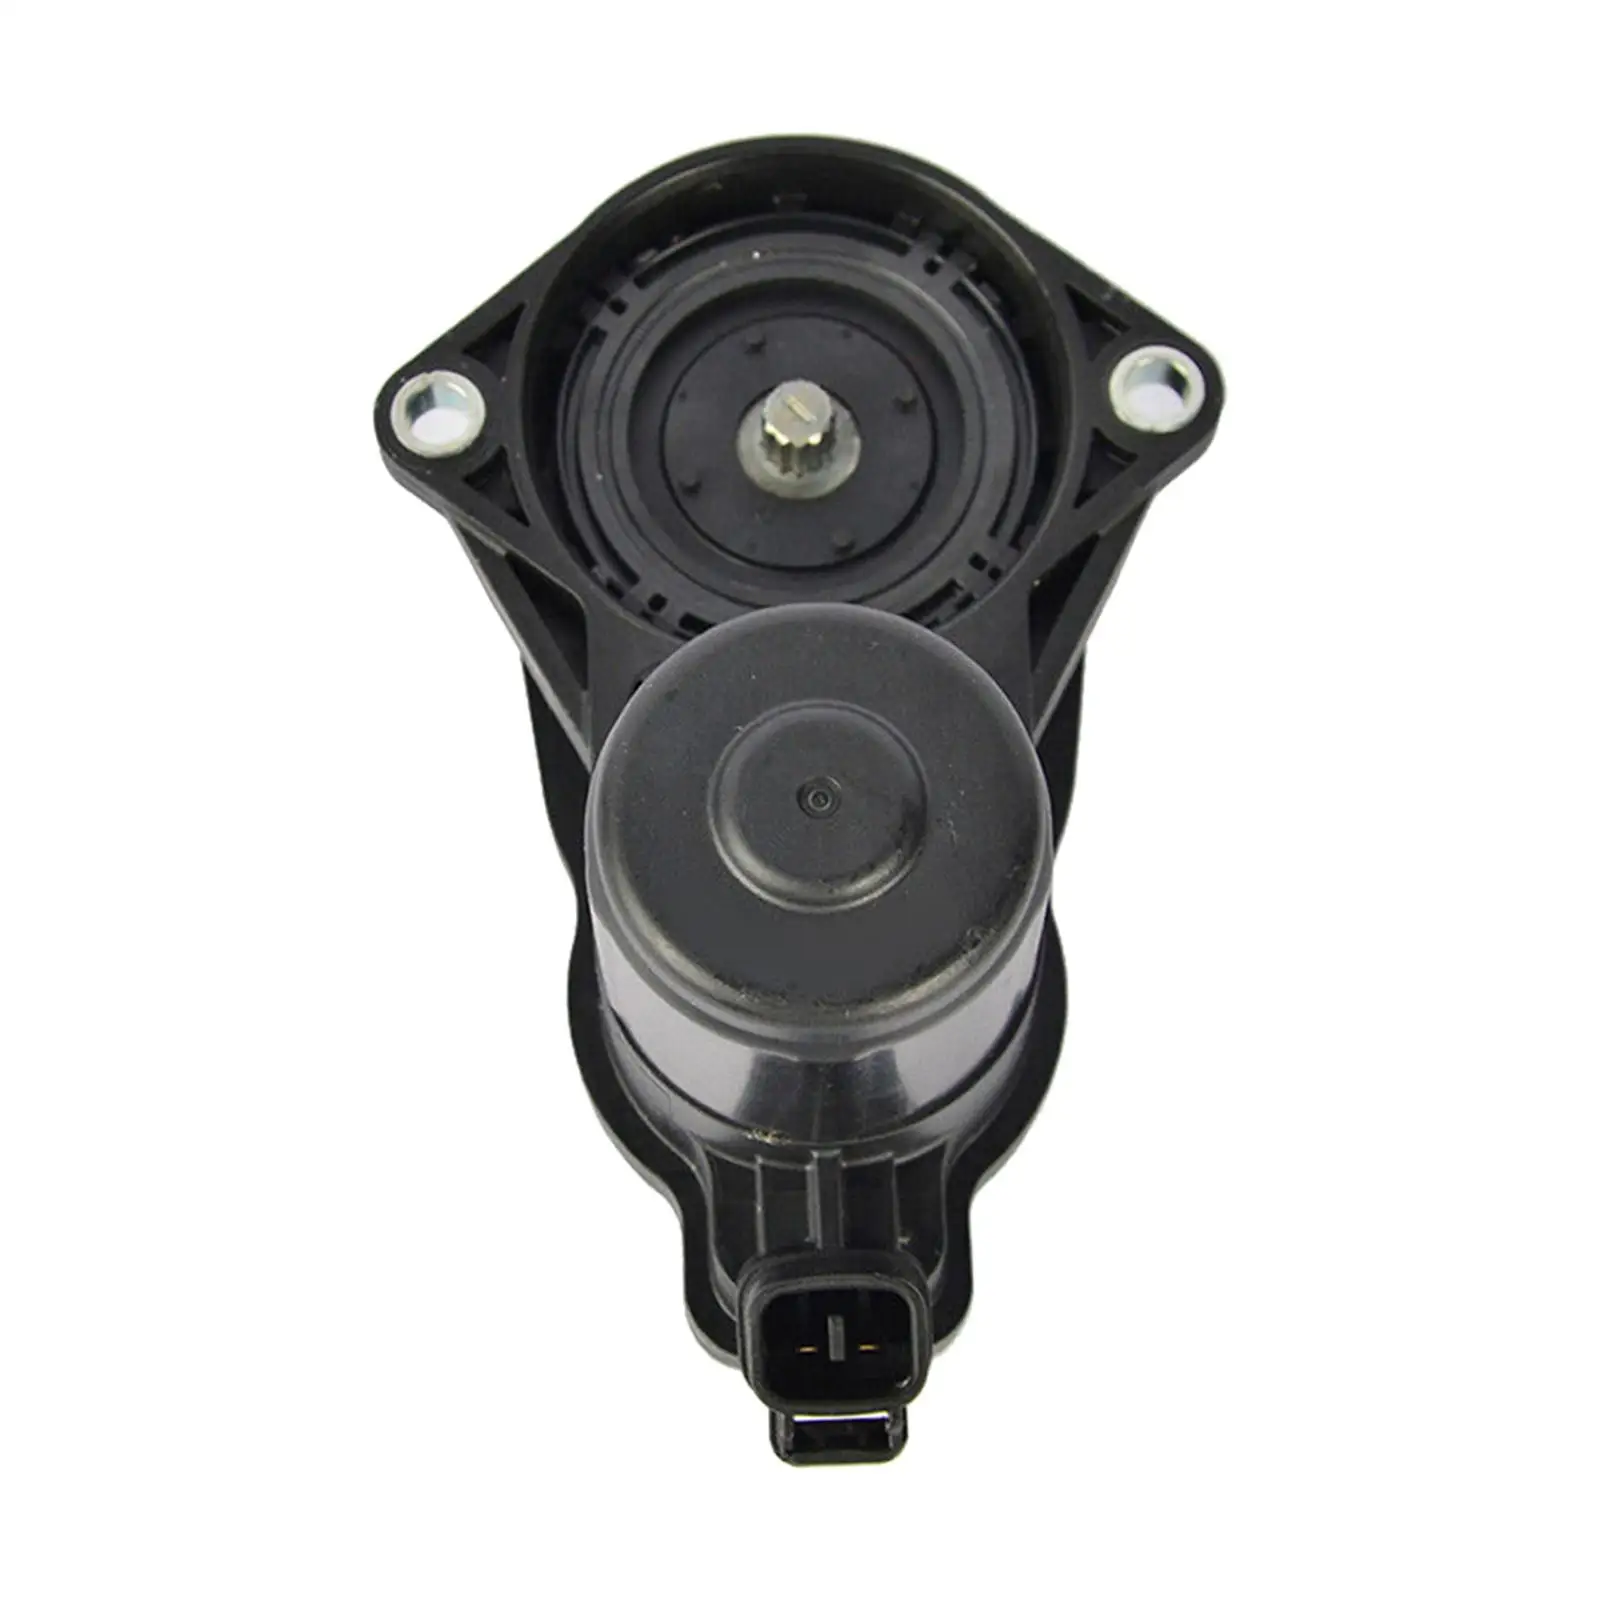 Parking Brake Actuator replacement for toyota Corolla Hatchback for c-hr